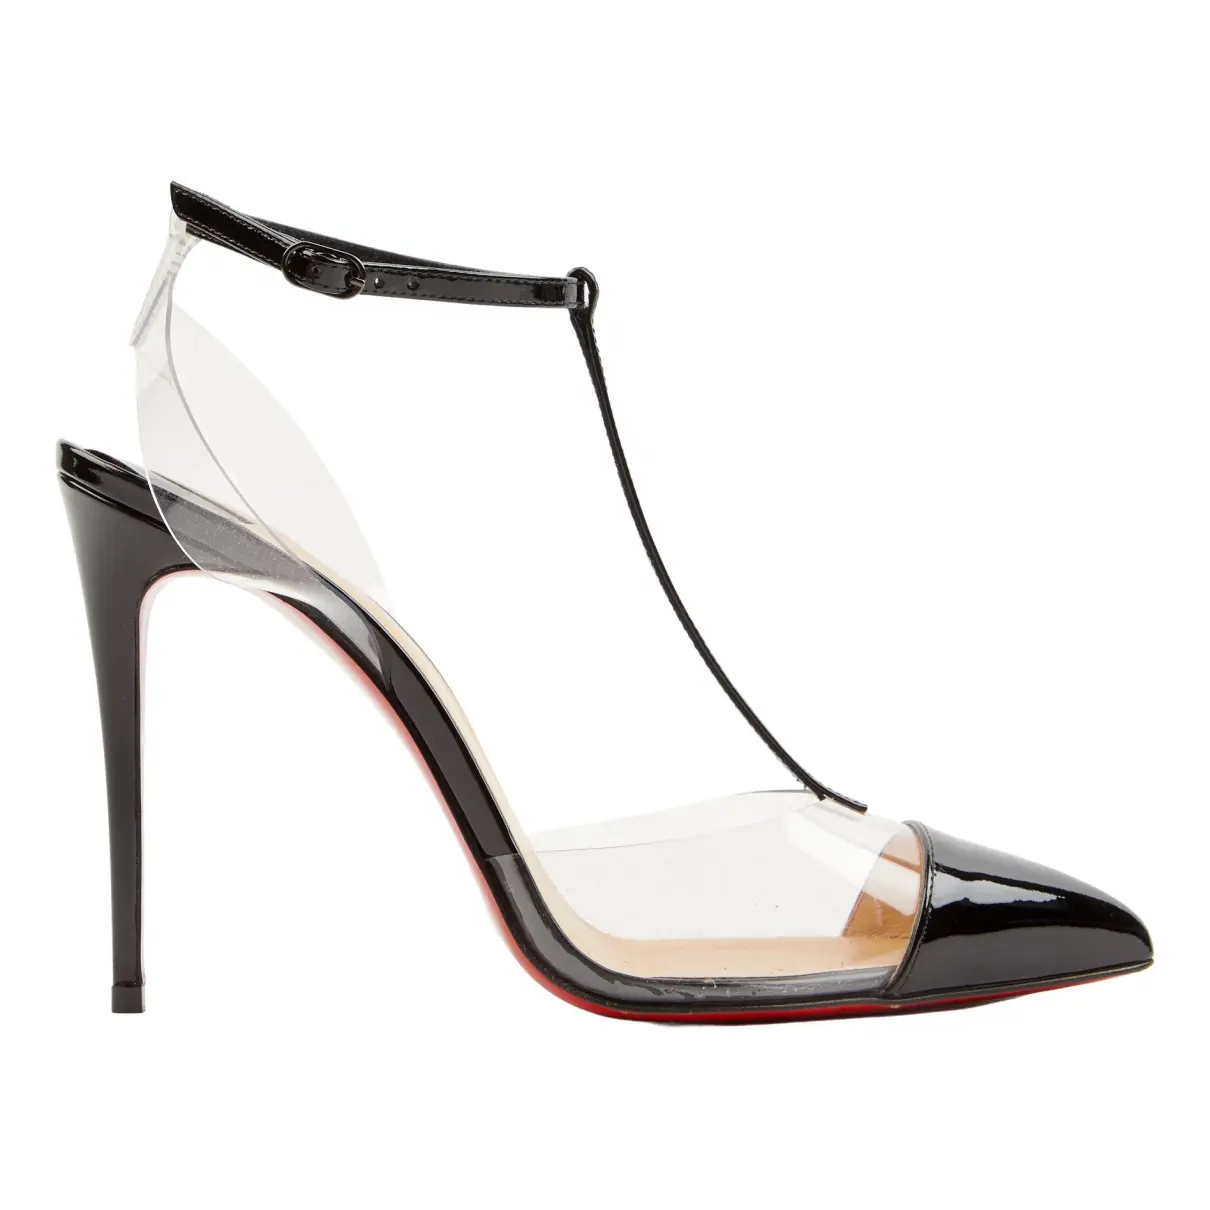 Patent leather heels Christian Louboutin